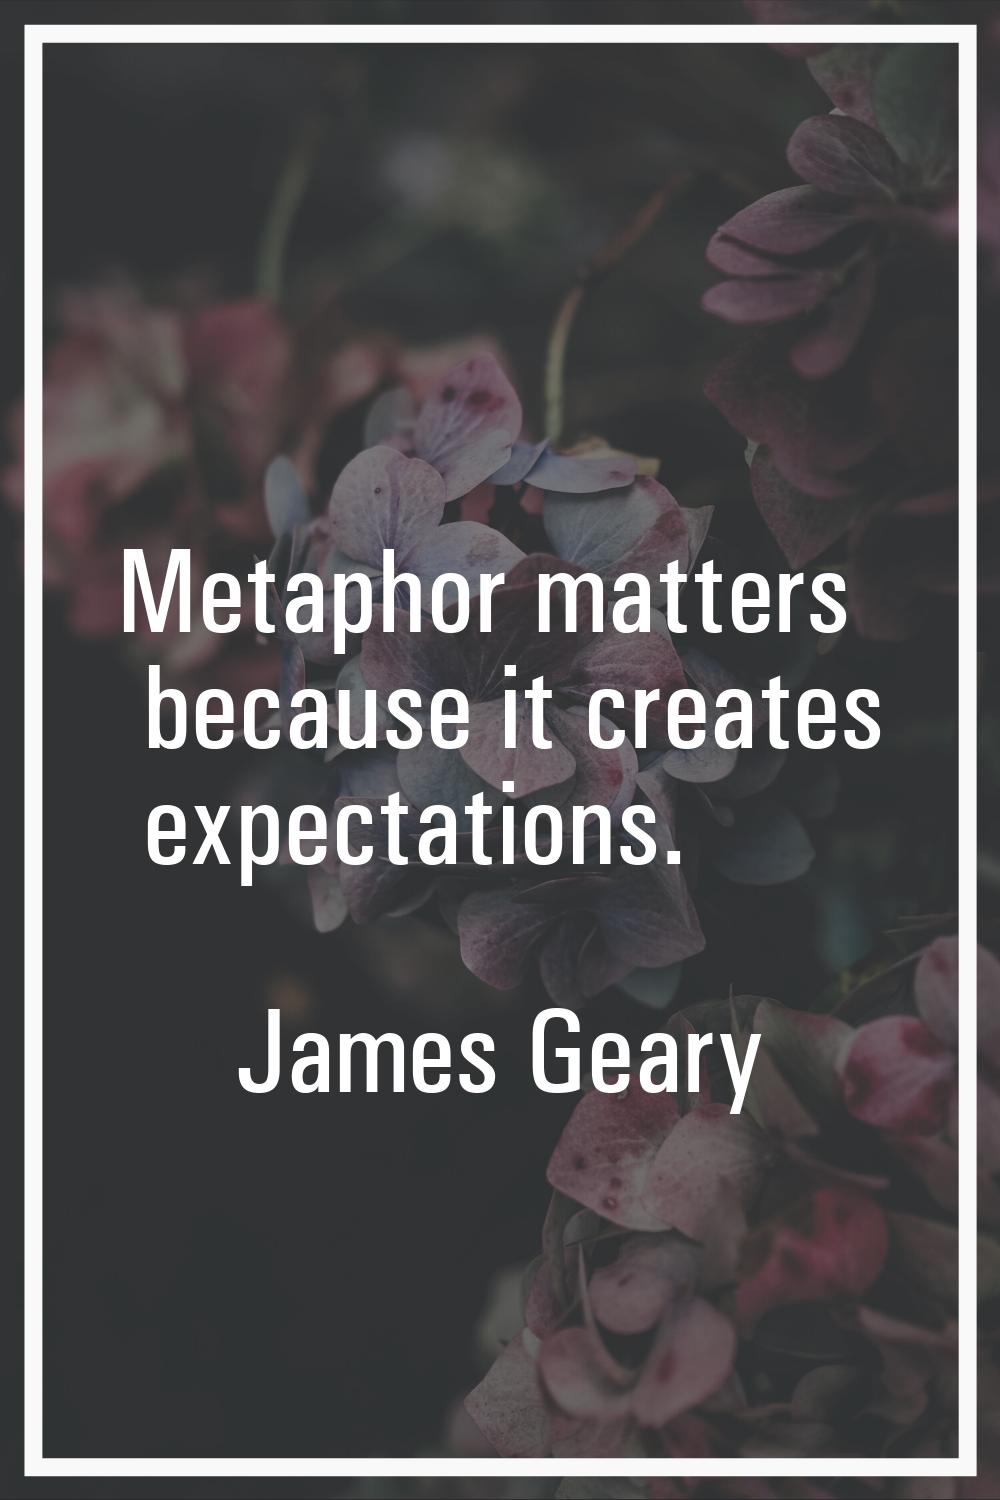 Metaphor matters because it creates expectations.